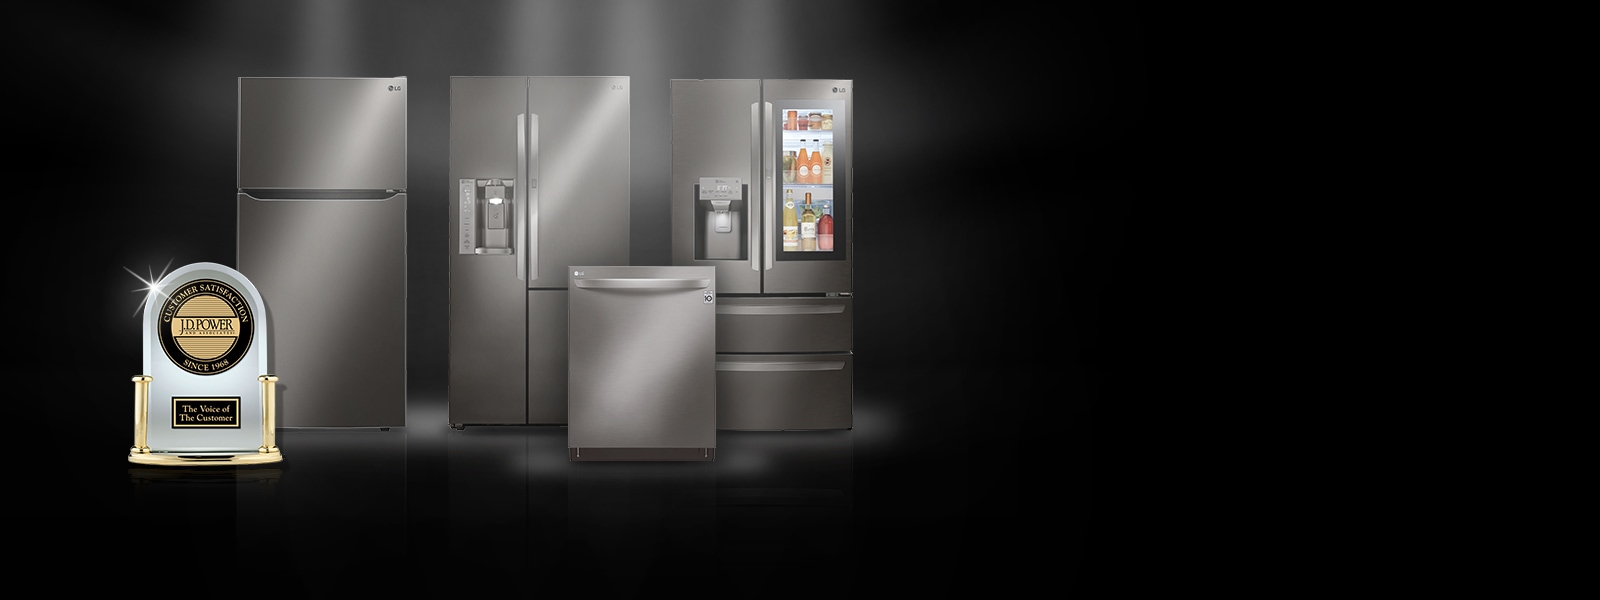 Kitchen Appliance Packages Appliance Bundles At Lowe S